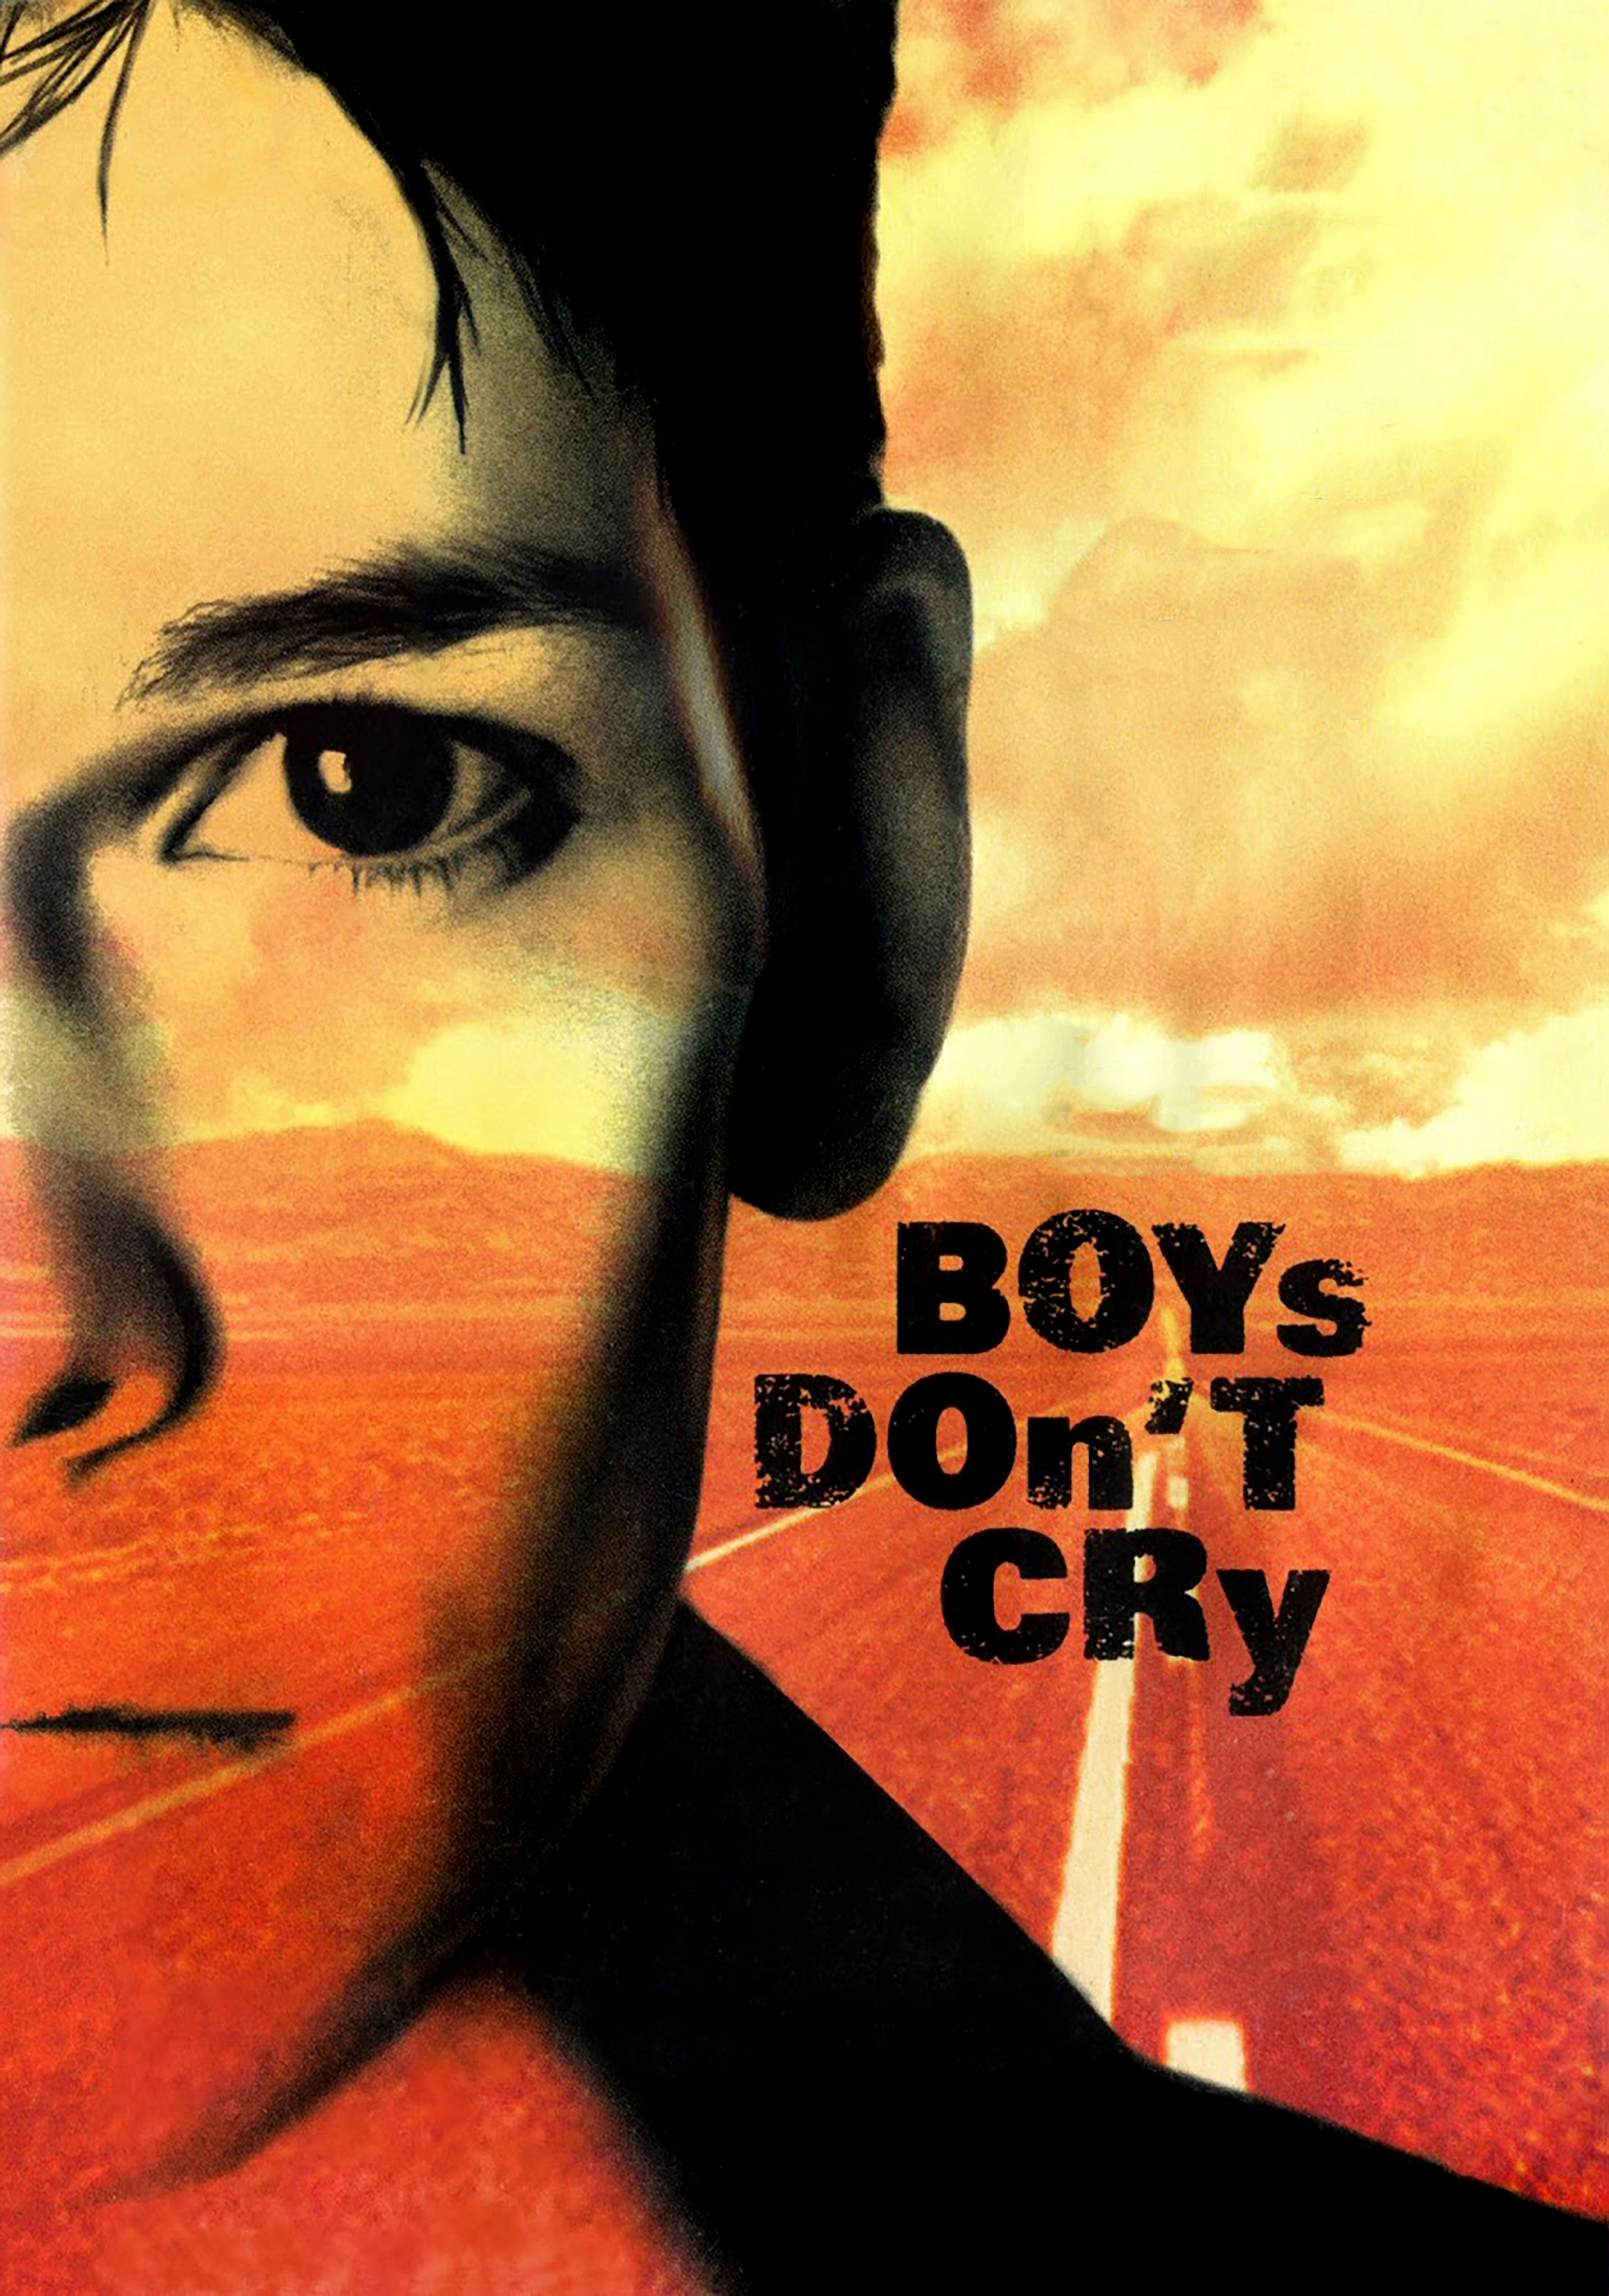 Boys Don’t Cry (2-52) DVD movie collectible [Barcode 024543001737] - Main Image 4